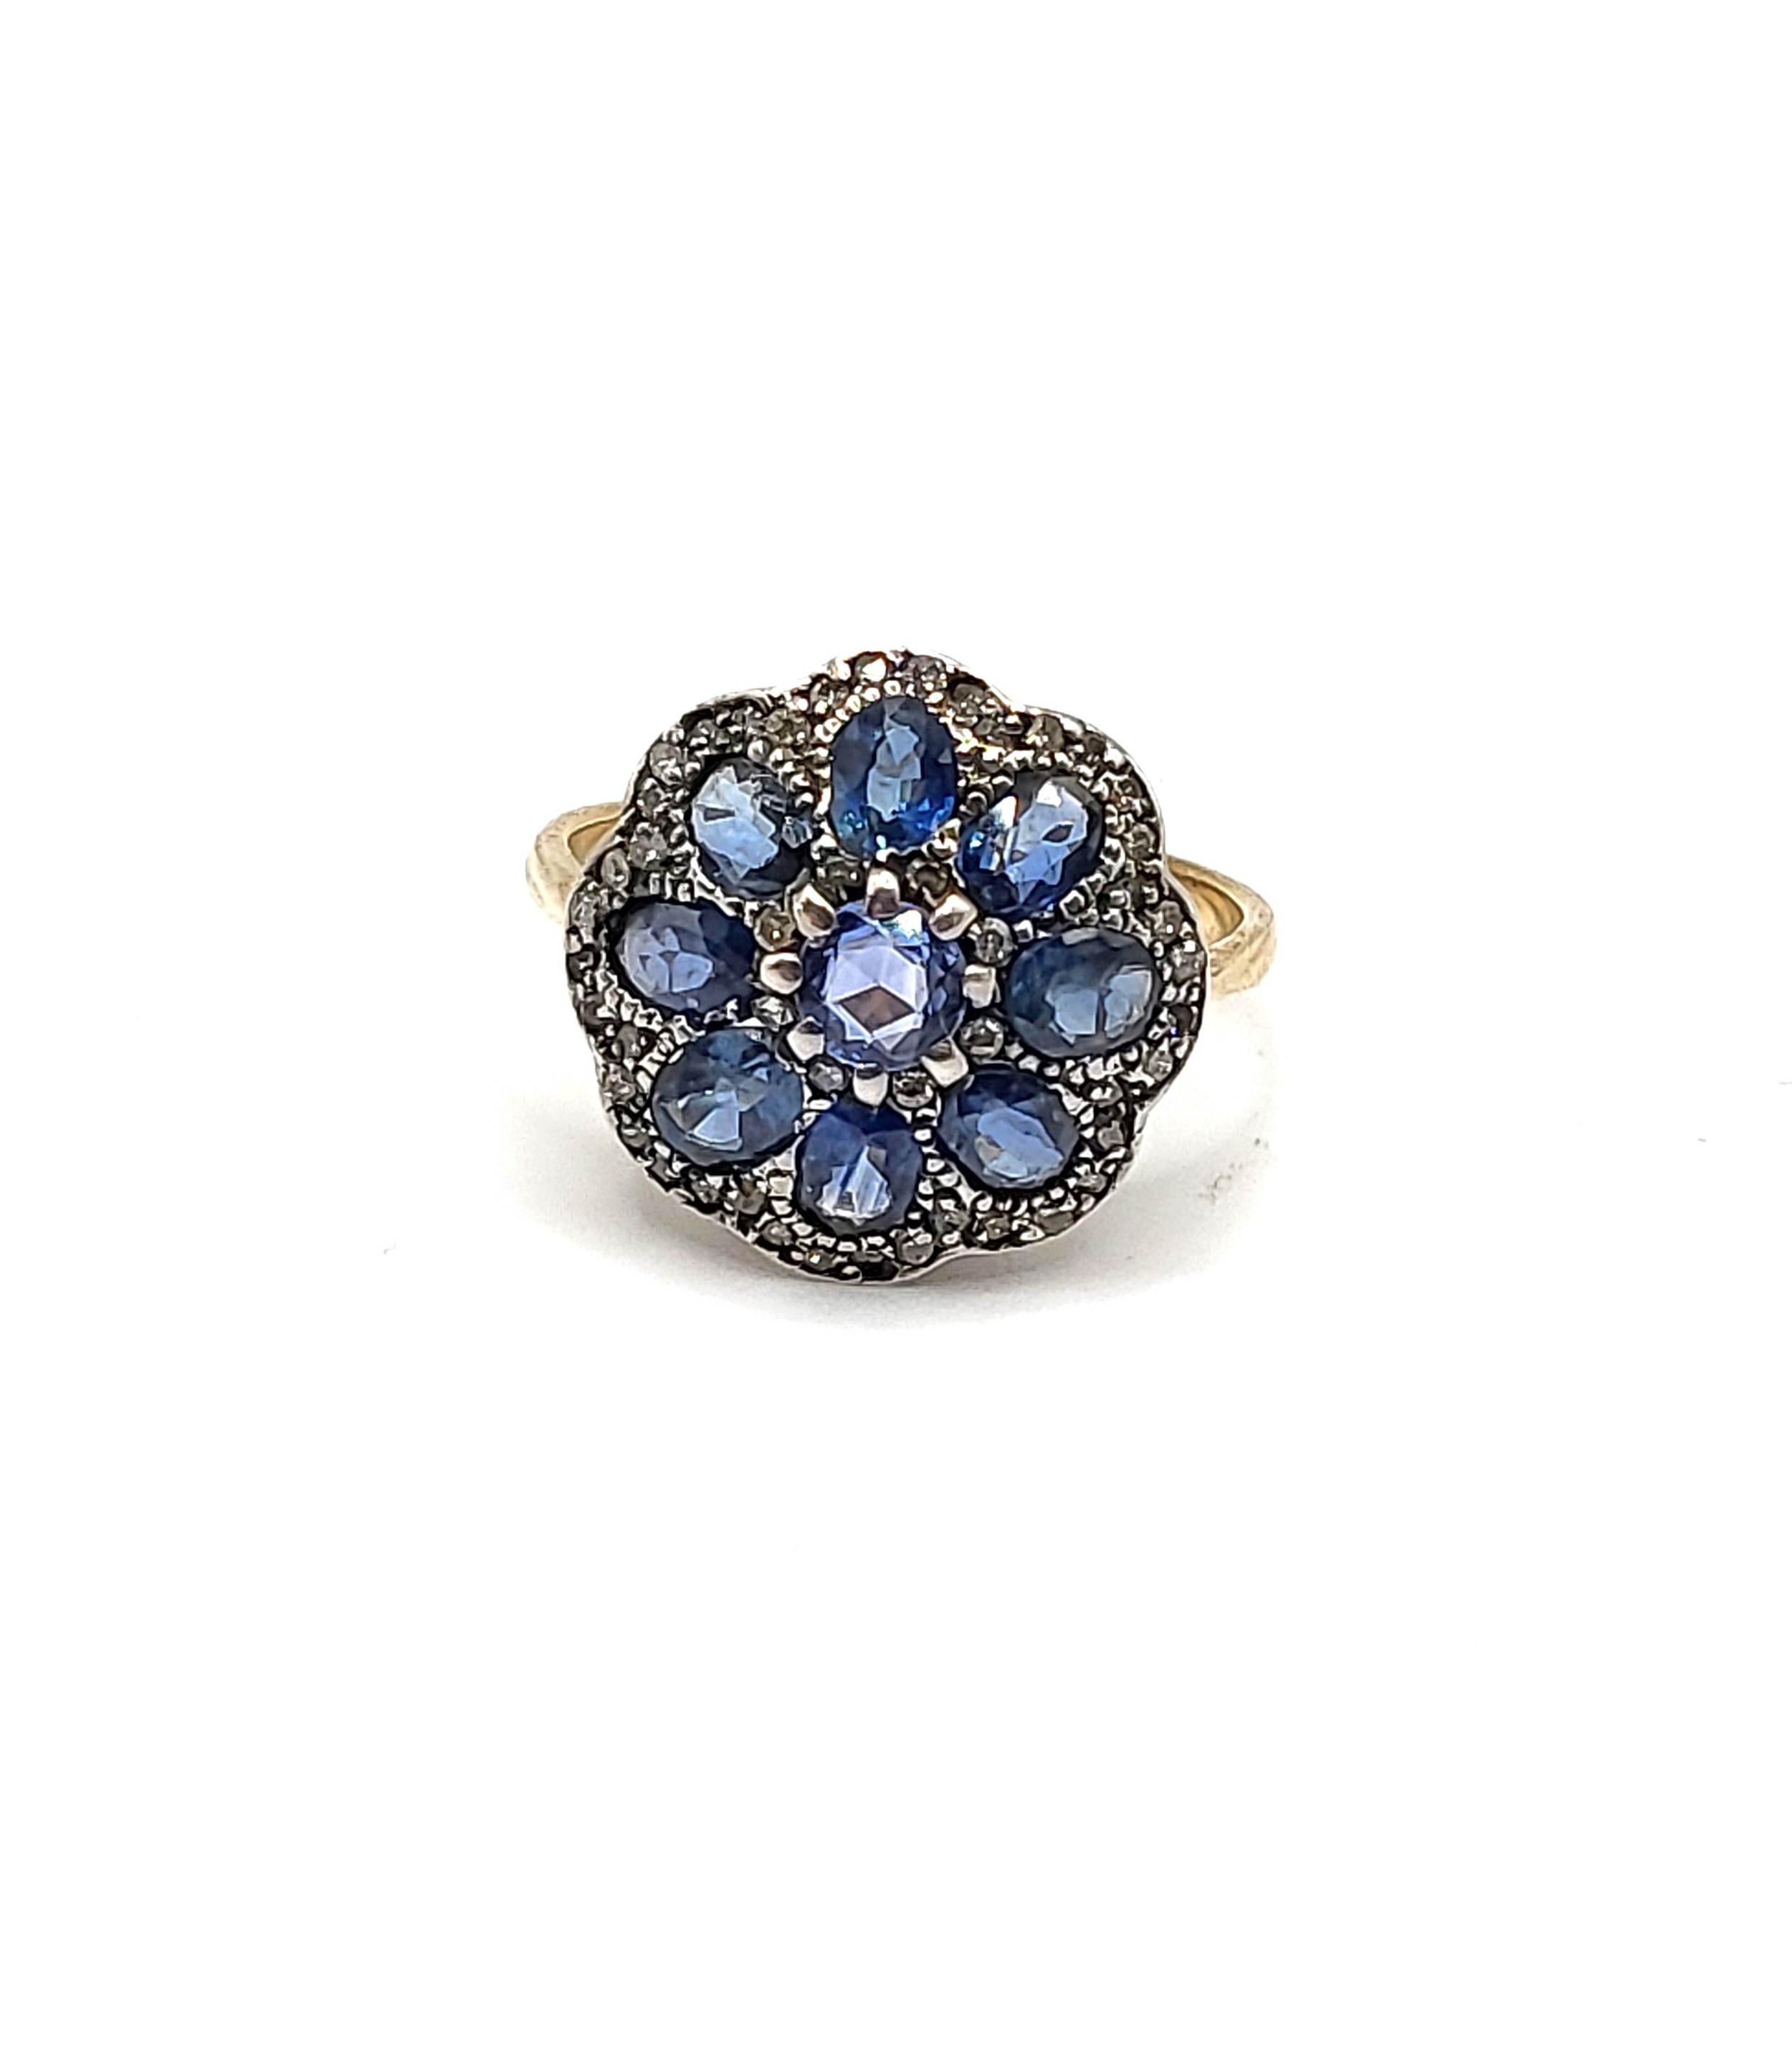 A yellow metal, sapphire, and diamond daisy cluster ring, the silver mount inset with mixed oval and